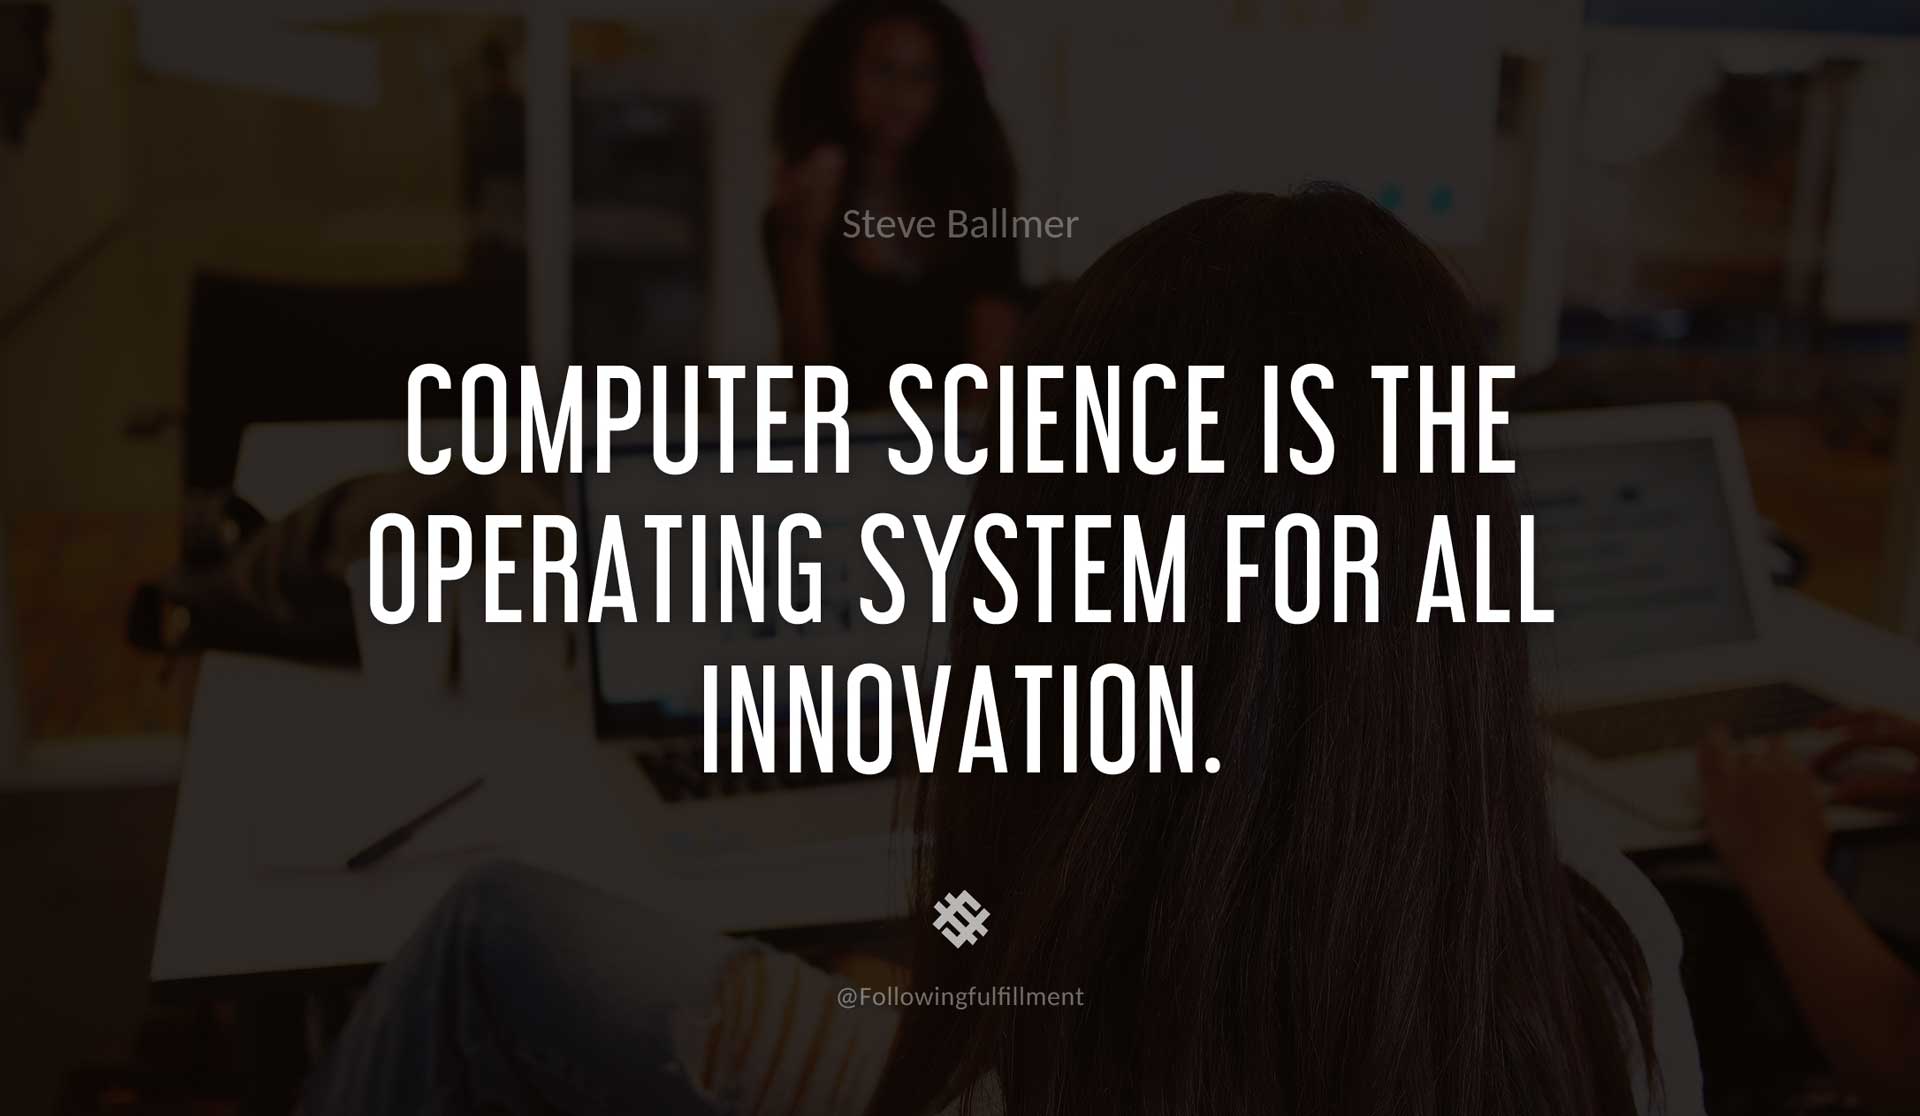 Computer-science-is-the-operating-system-for-all-innovation.-STEVE-BALLMER-Quote.jpg